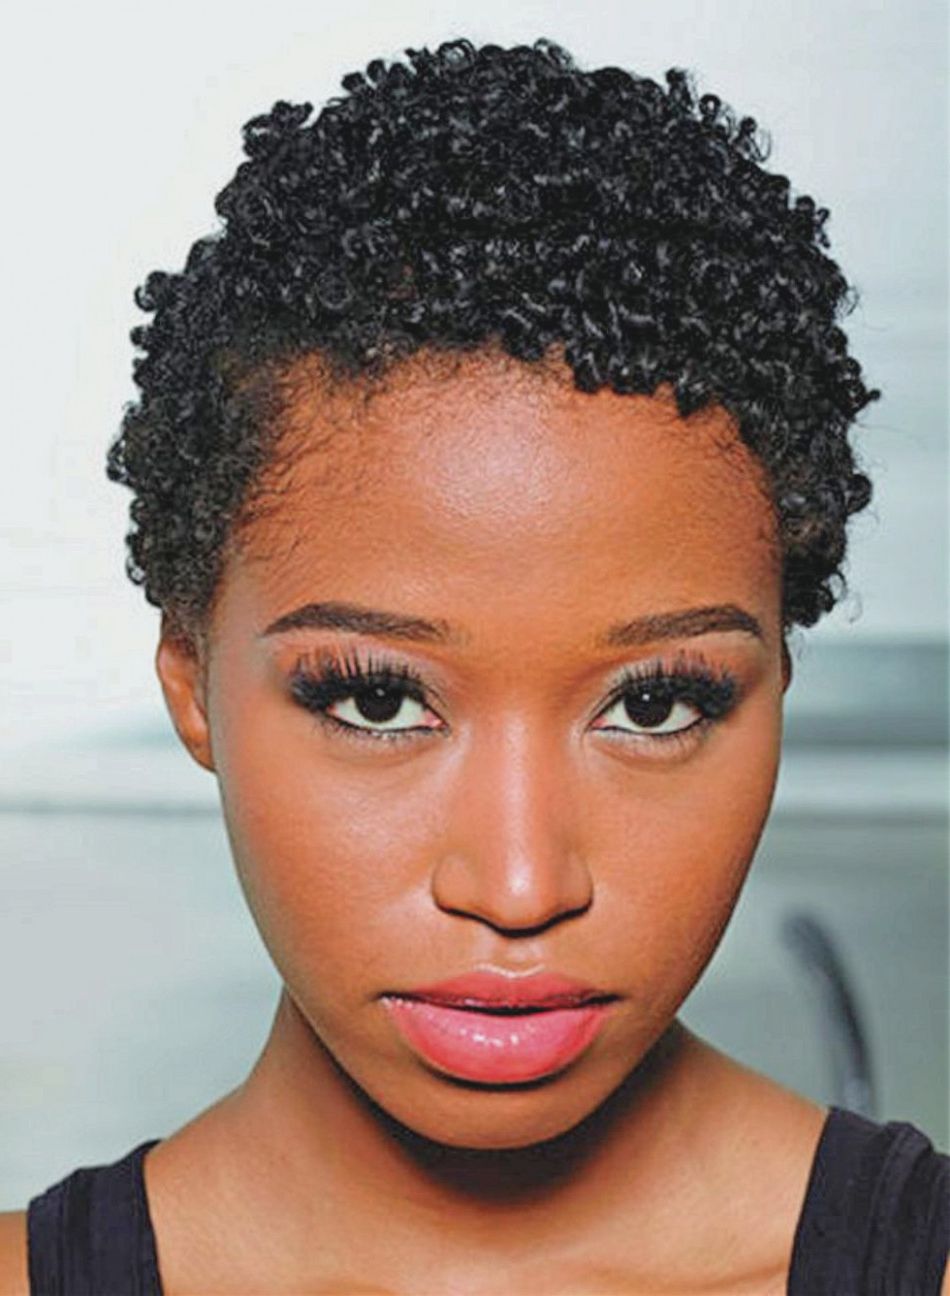 Short Hairstyles: Natural Short Hairstyles For Black Women Quick Inside Black Women Natural Short Haircuts (View 17 of 25)